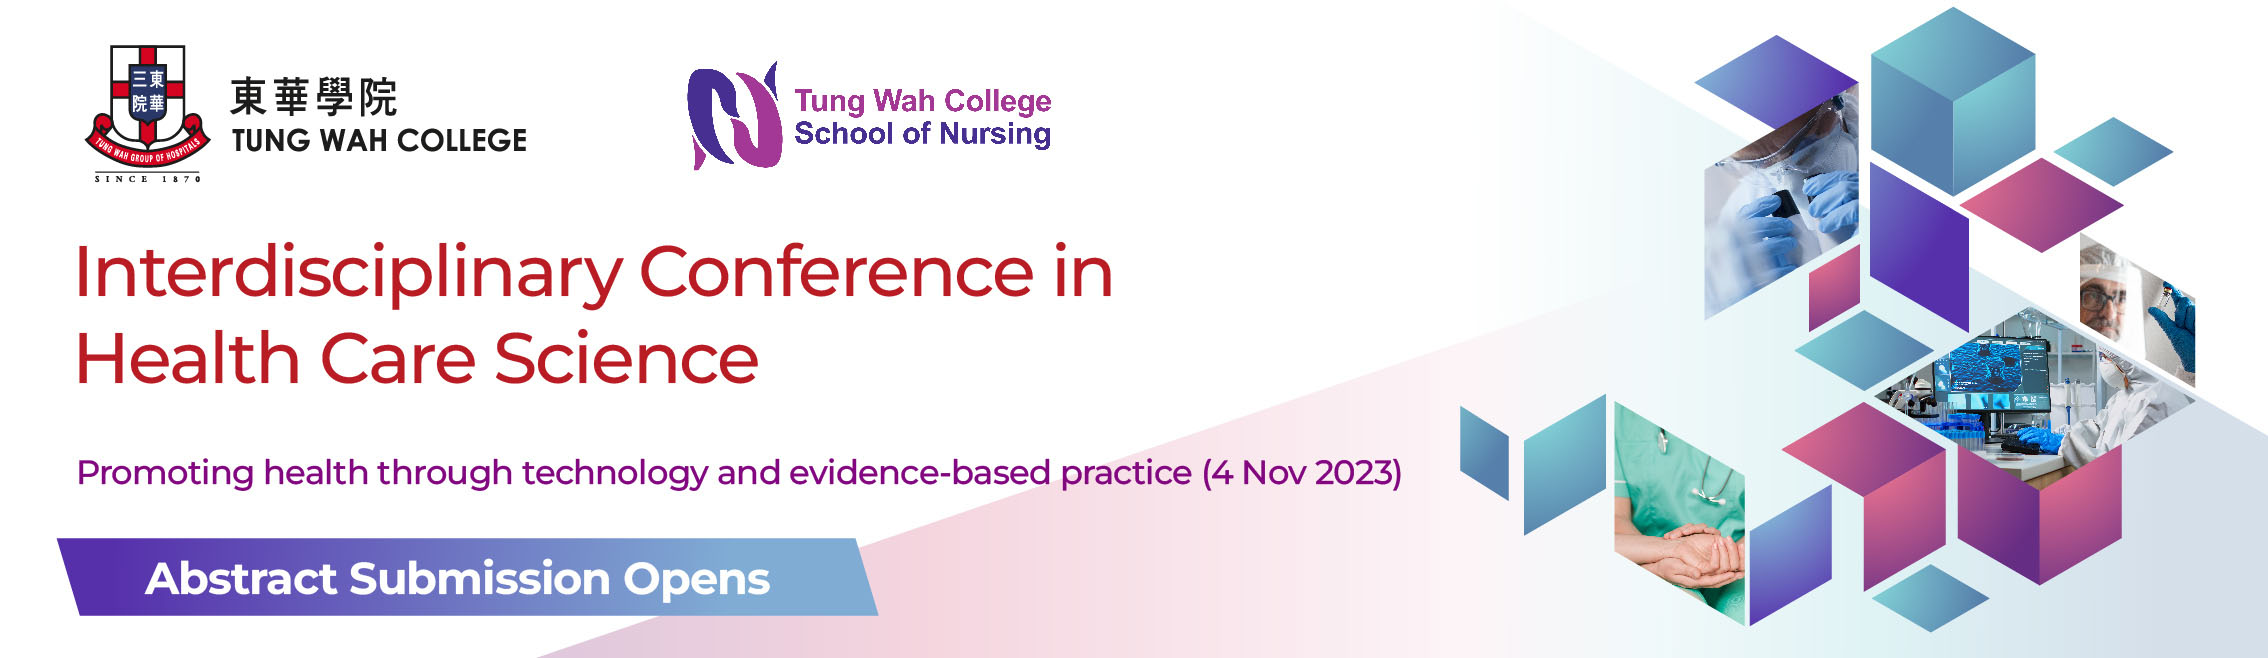 Interdisciplinary Conference in Health Care Science: Promoting health through technology and evidence-based practice